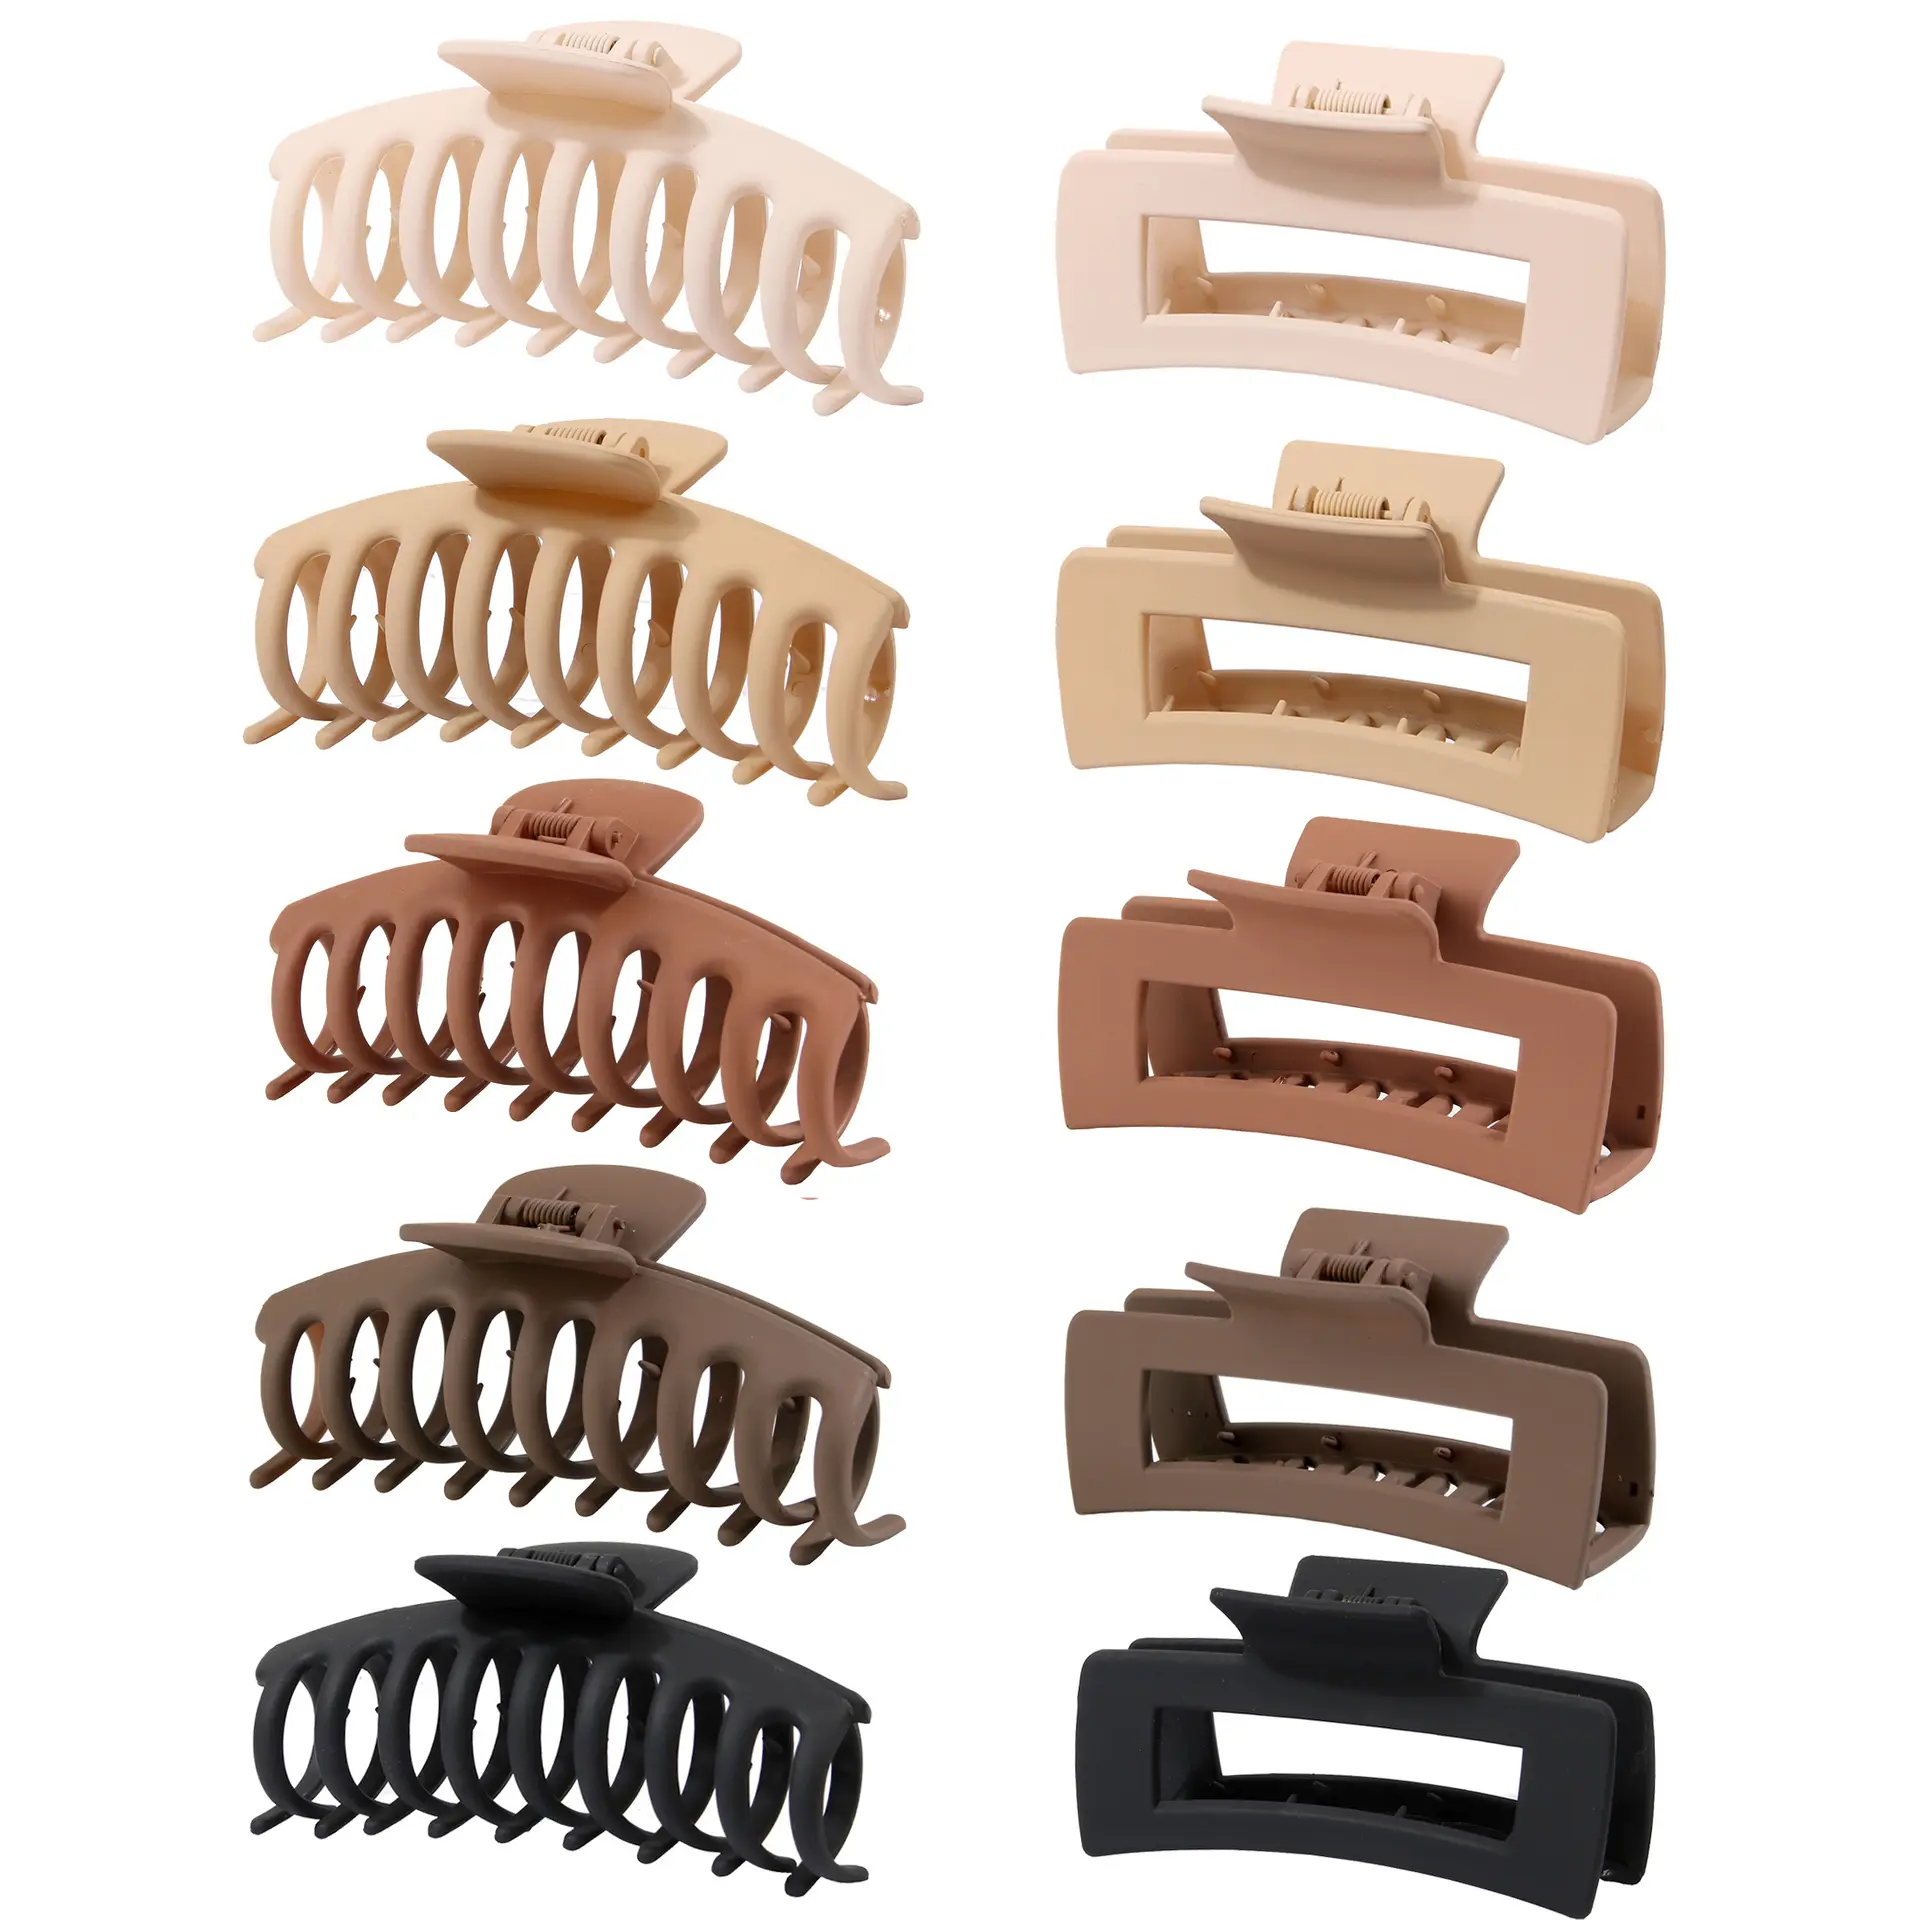 10 Pack Large Size Hair Clips Set Non-slip Matte Strong Hold Hair Jaw Claw Clips Hair Accessories for Women